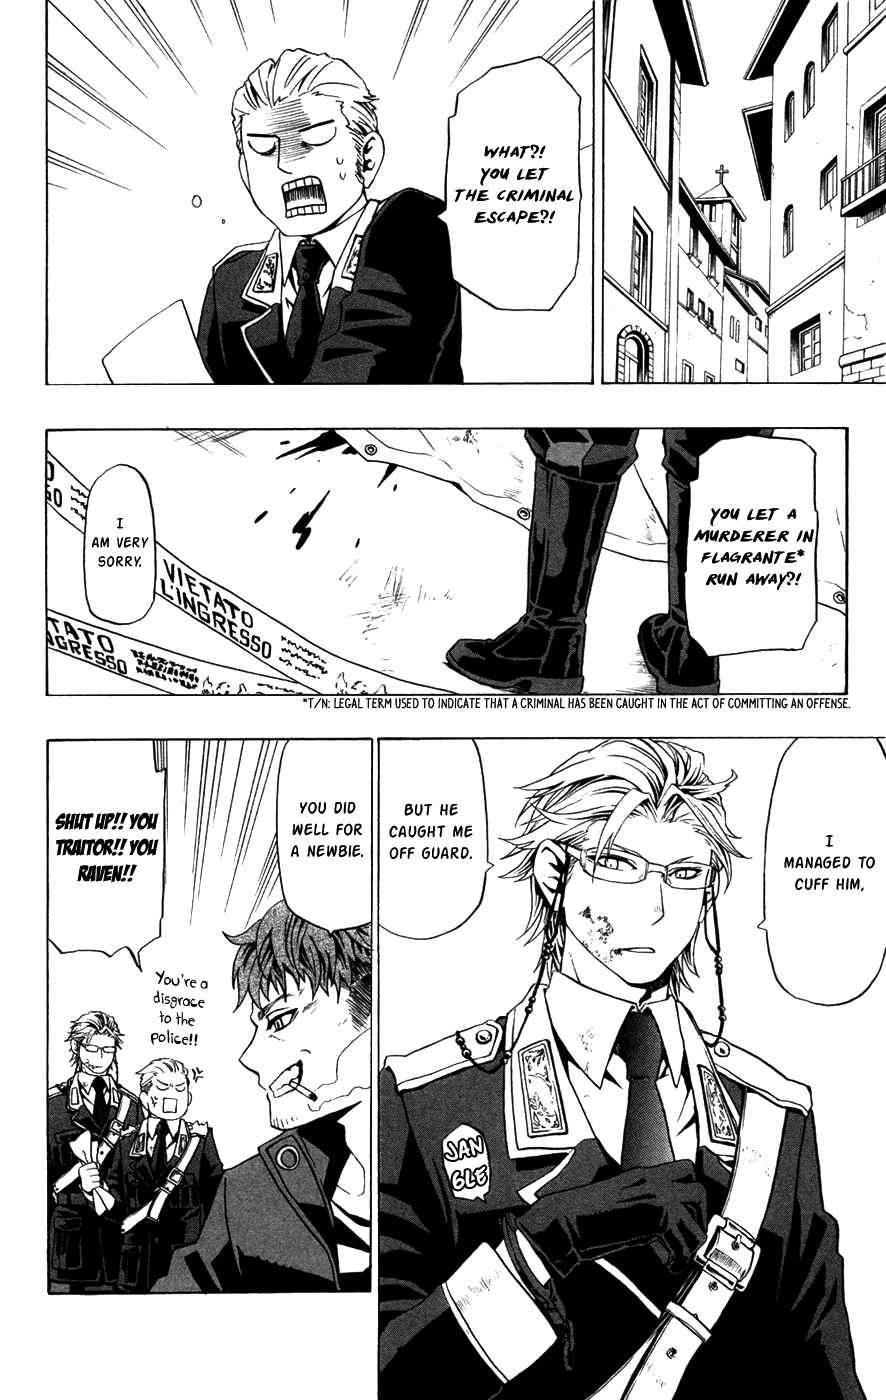 Red Яaven Vol. 8 Ch. 39 No Number